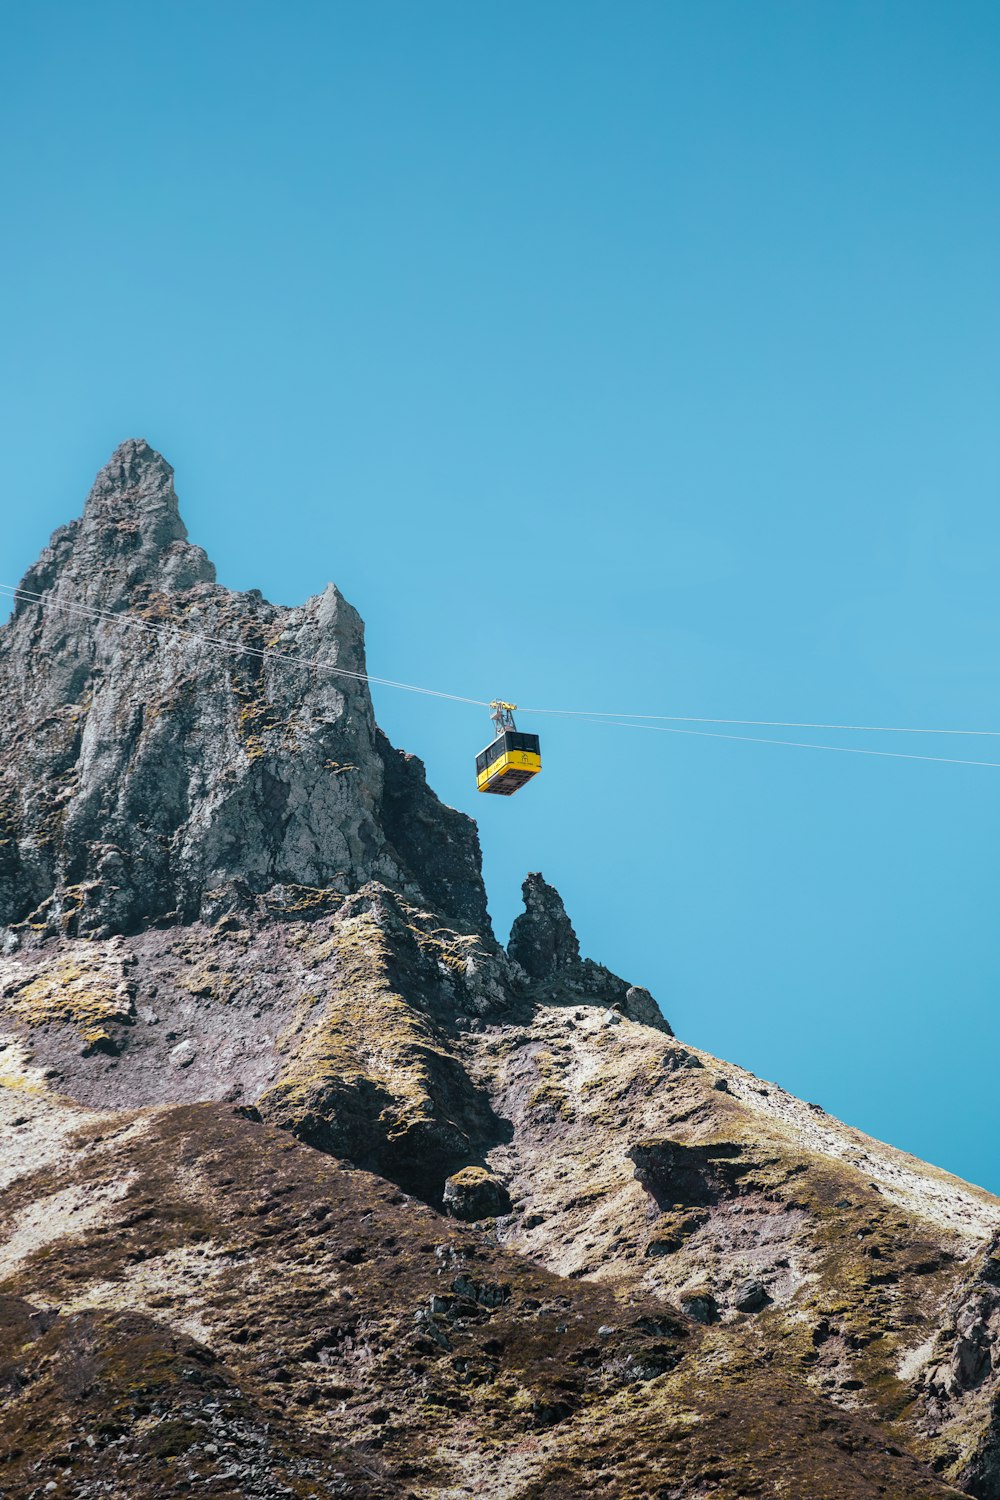 a kite is being flown over a mountain